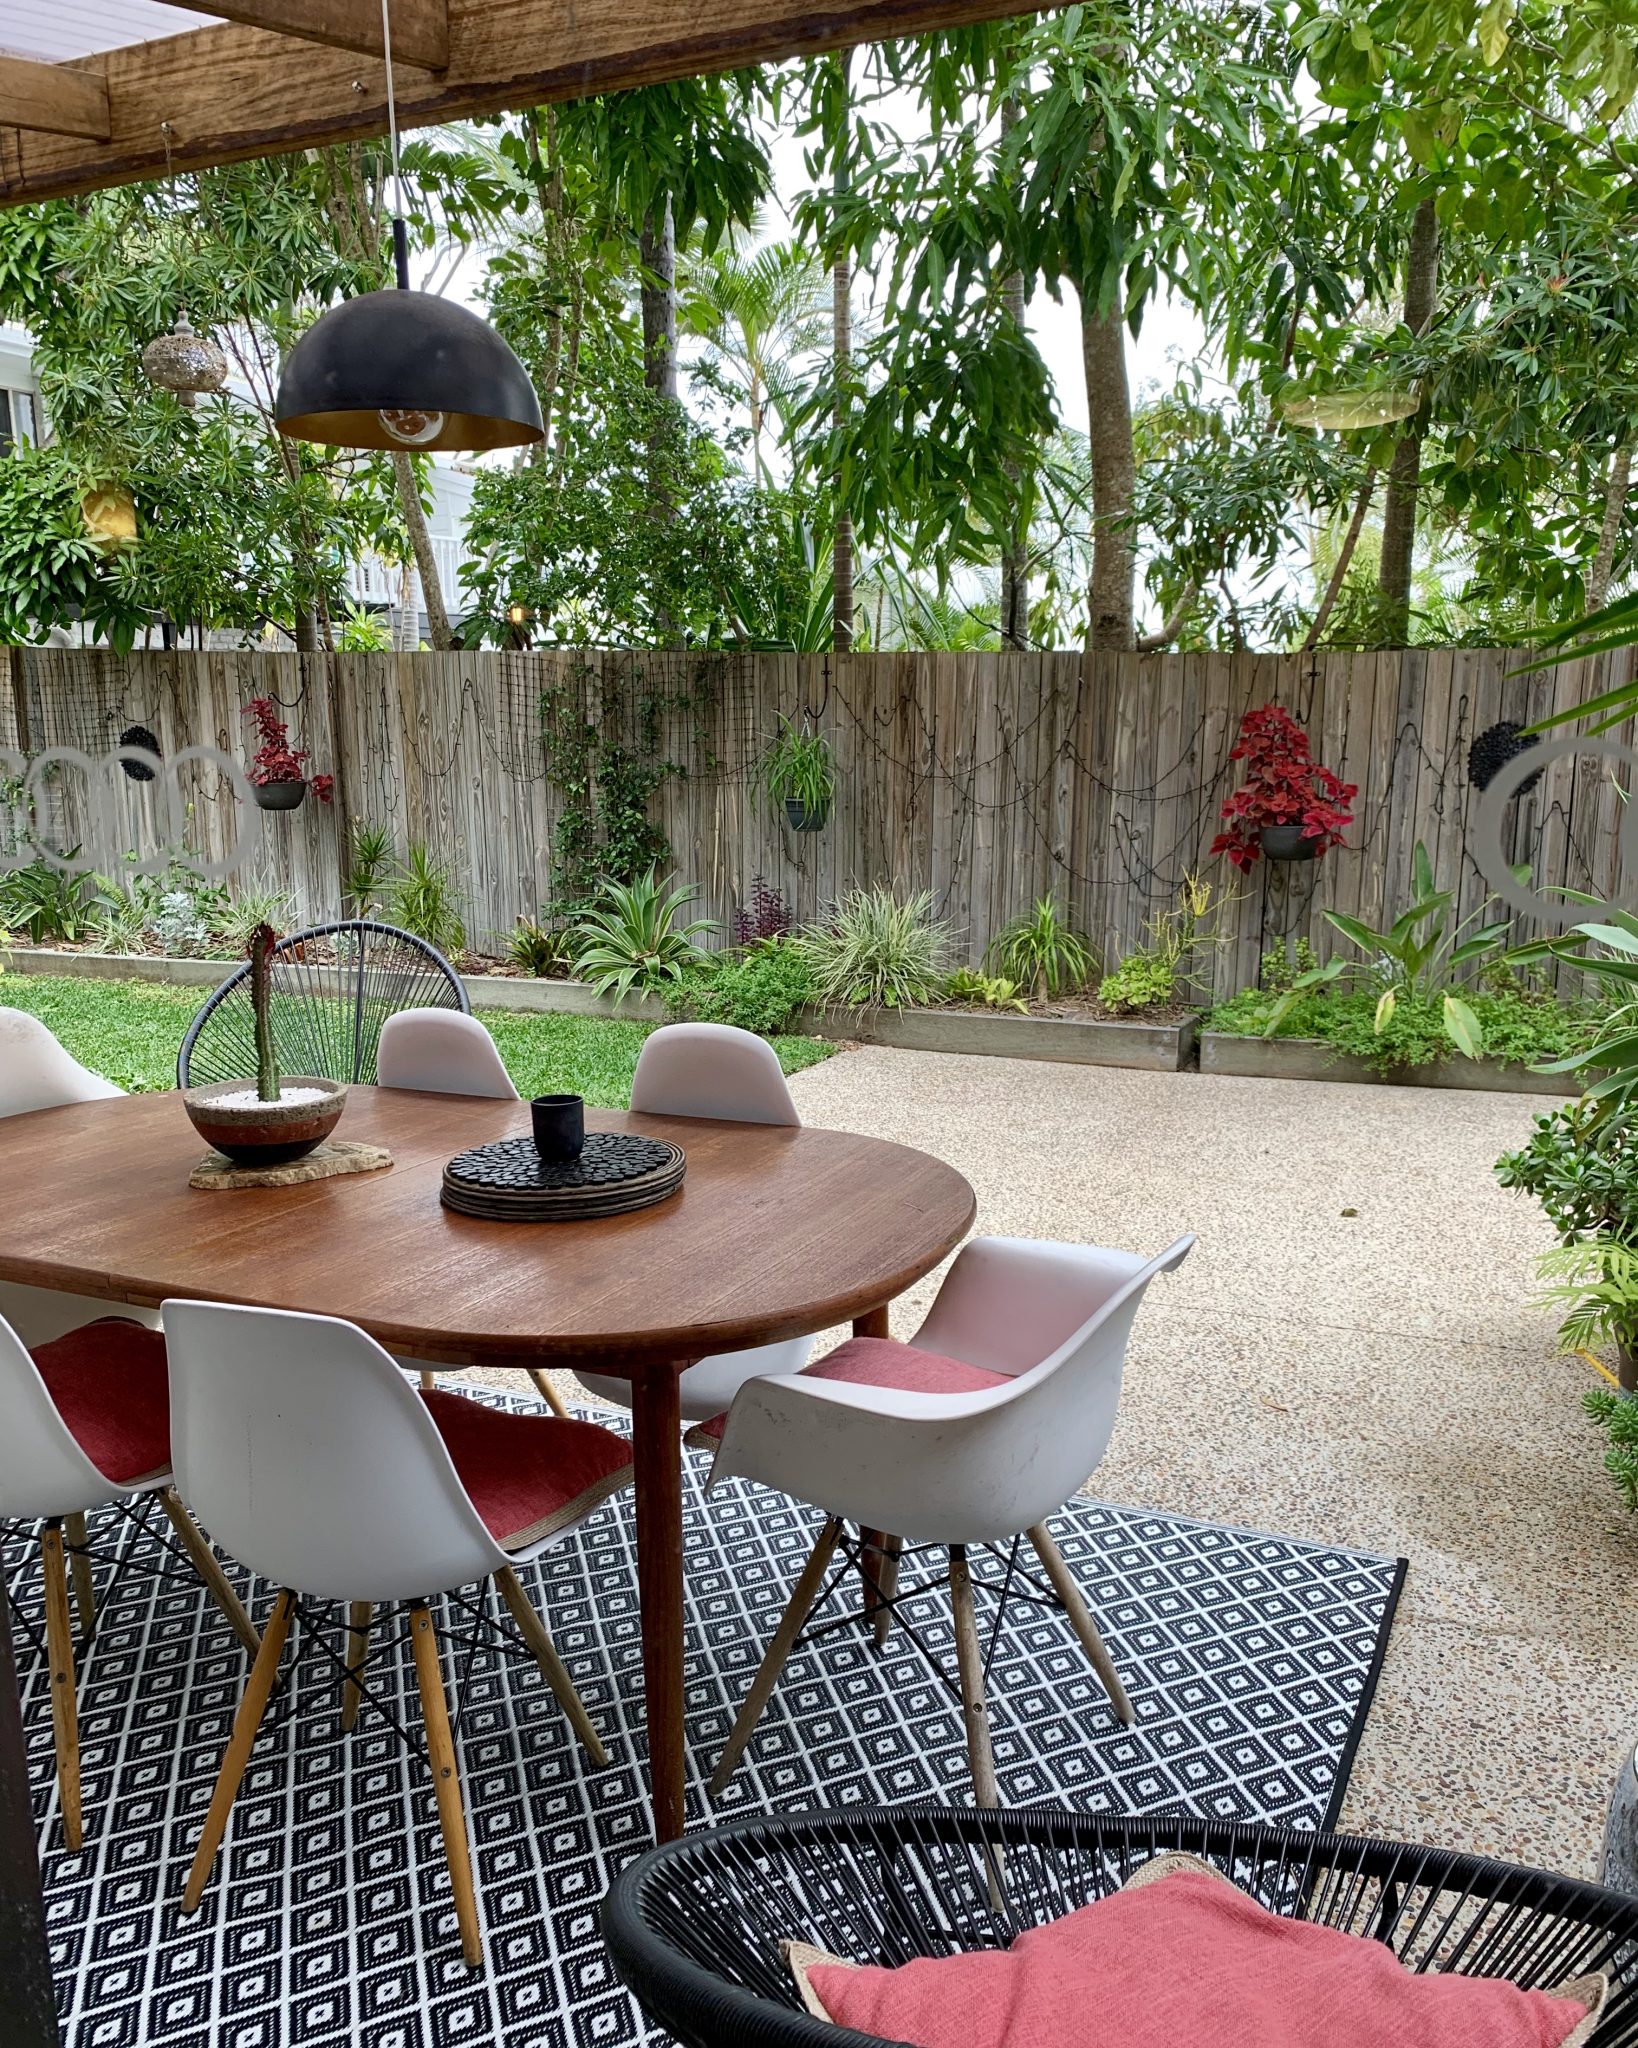 Outside area at our Airbnb in Noosa